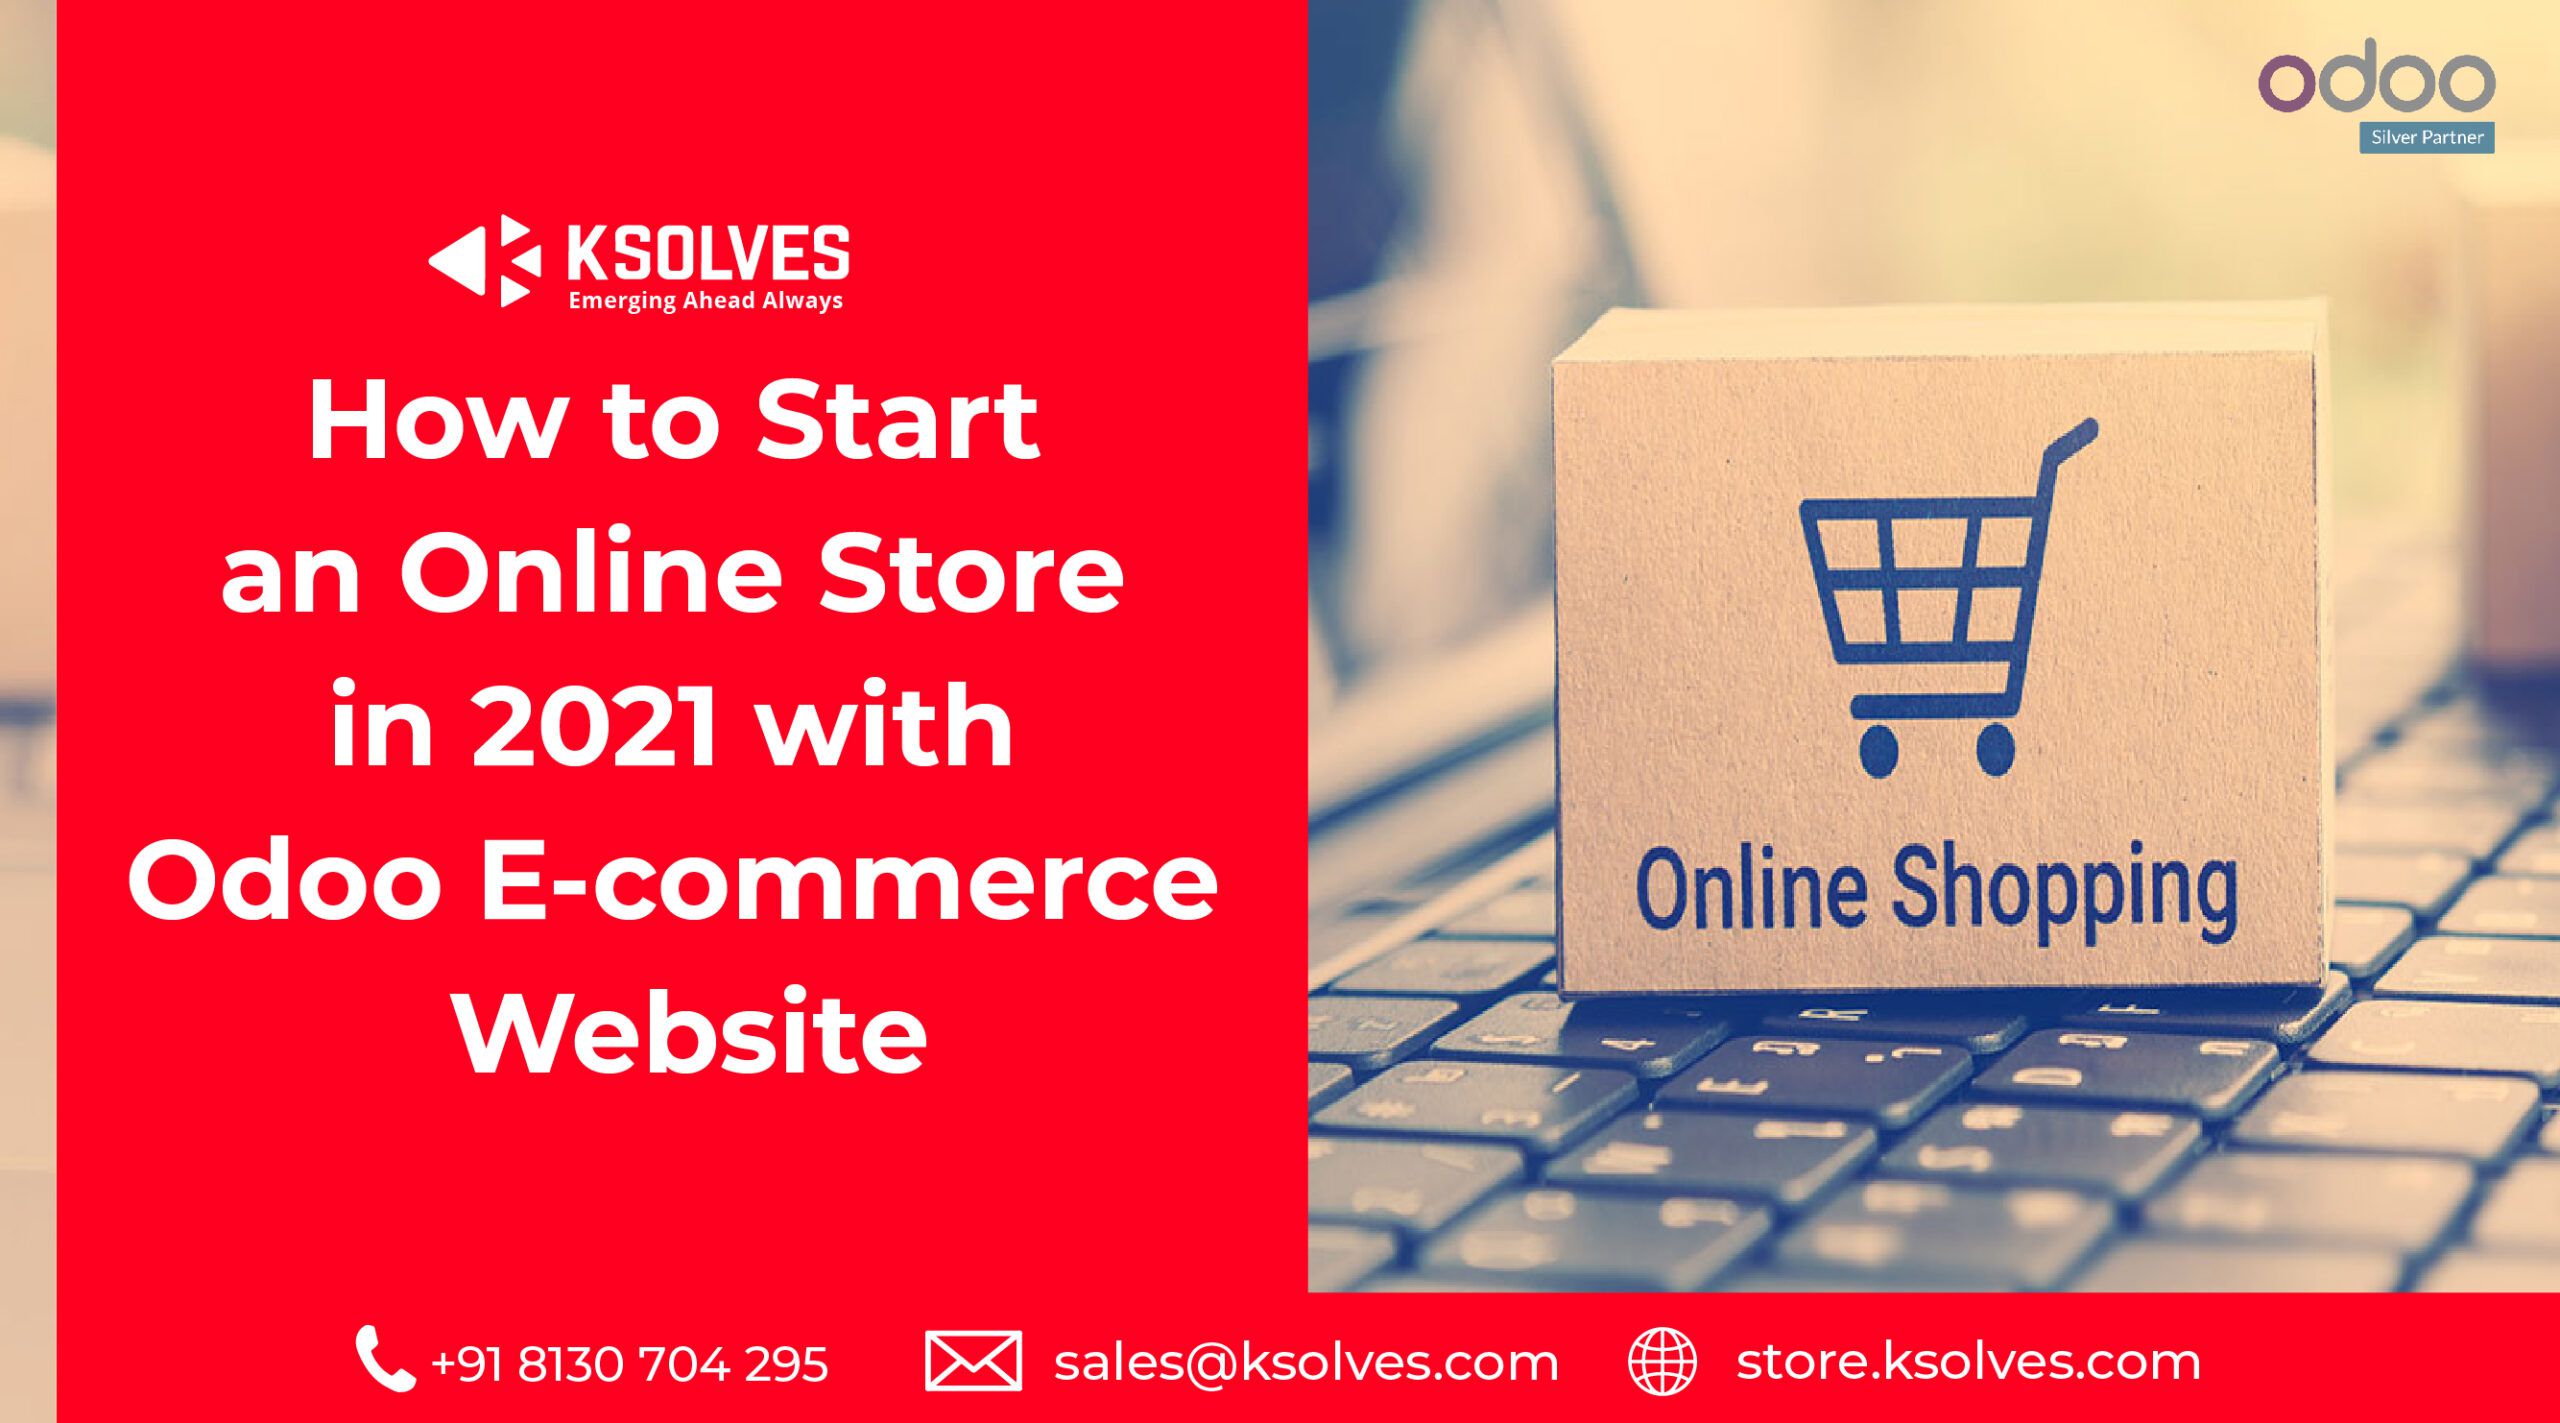 How to Start an Online Store in 2021 with Odoo Ecommerce Website